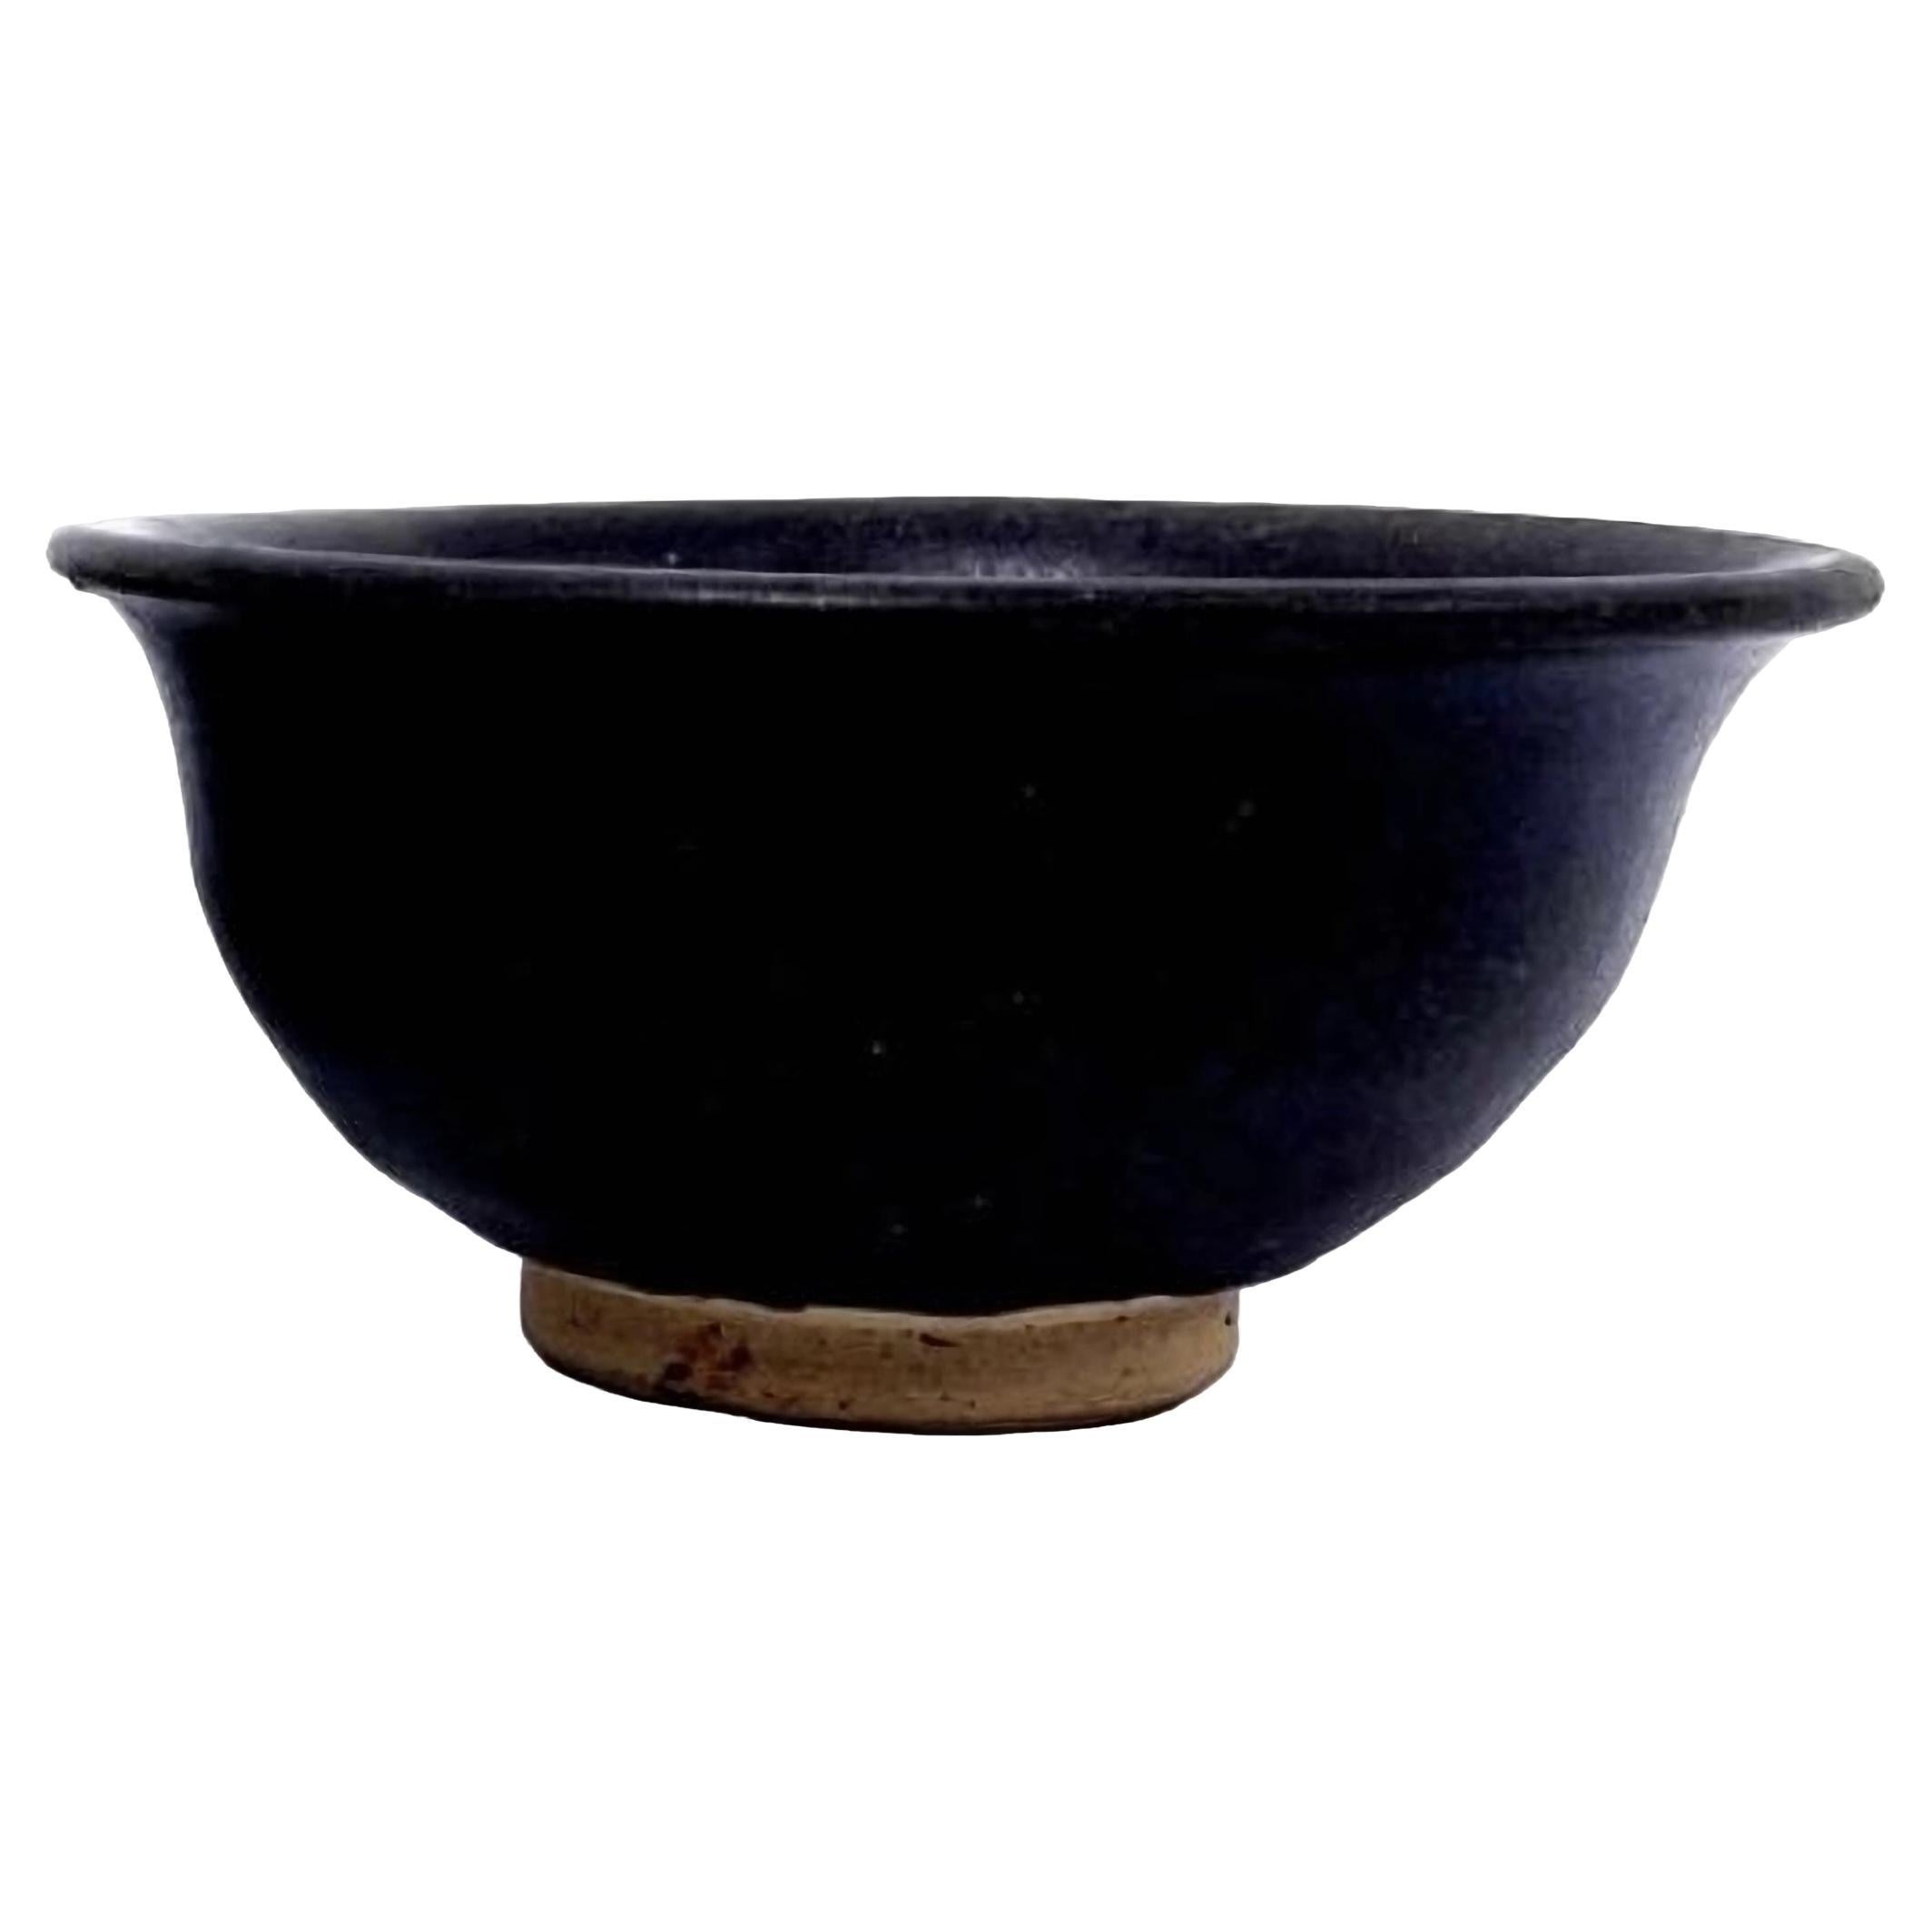 A Chinese Deep Brown Glazed Footed Bowl, 15th Century